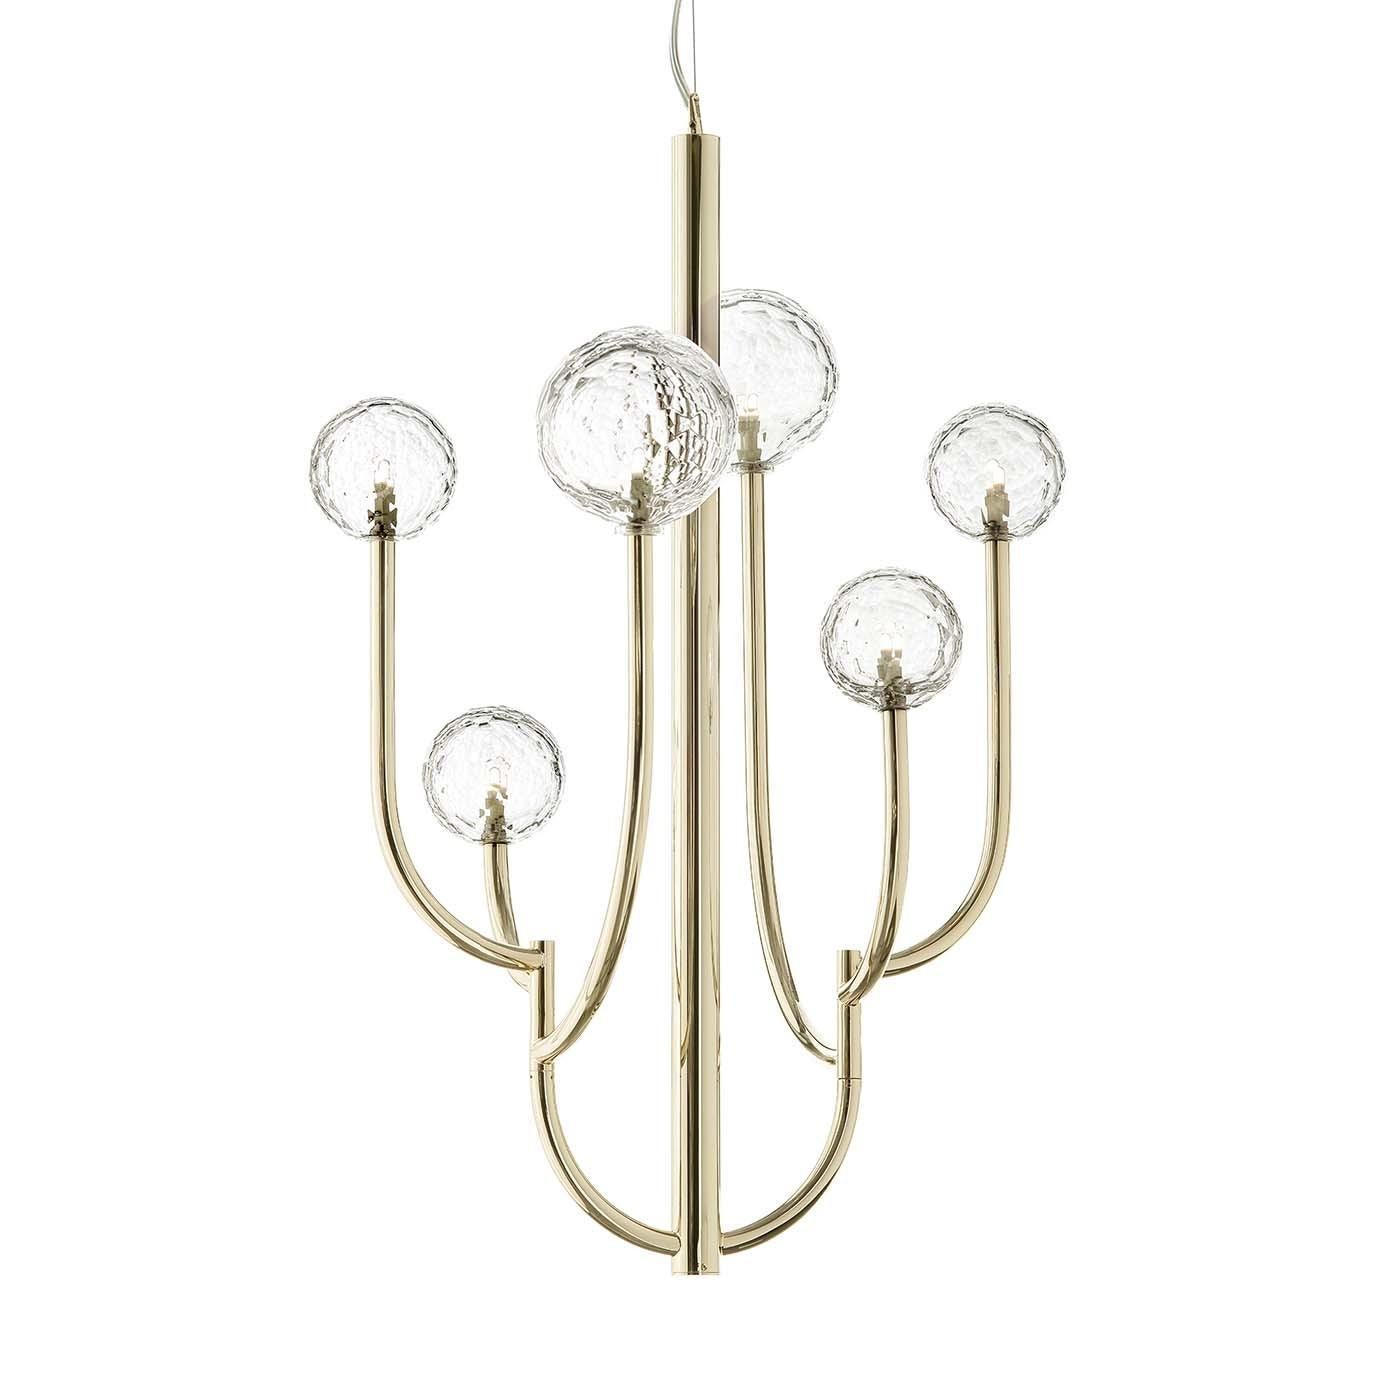 Sophisticated and unique, this chandelier has a minimalist metal frame with a soft gold finish showcasing six globes of hand-cut Italian crystal arranged at different heights. Mounted on a central pole, the two arms are placed facing each other as